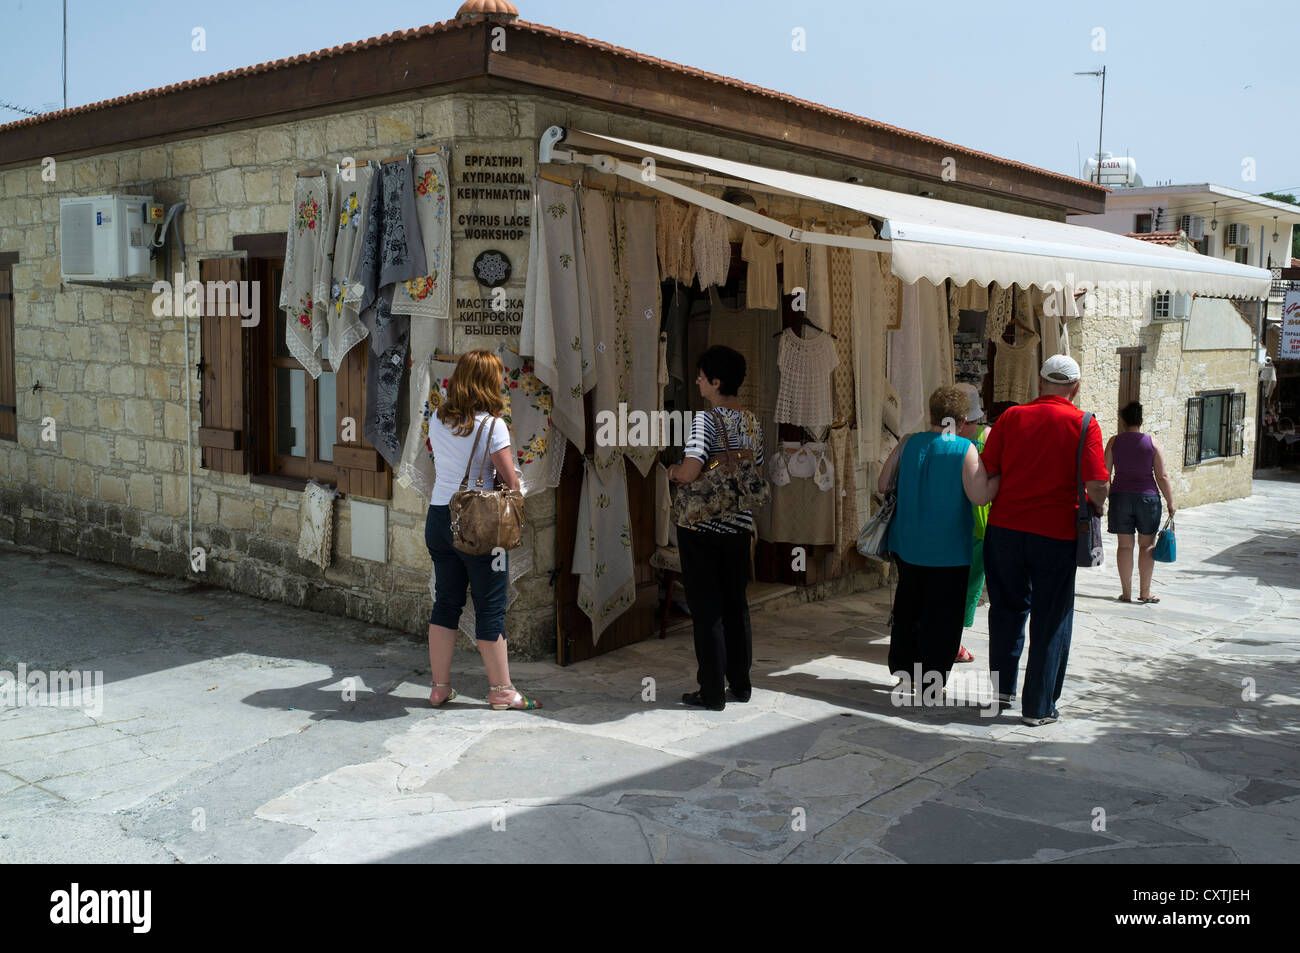 dh Omodos TROODOS CYPRUS Women tourists shopping Cypriot village street shops lace craftwork holiday woman Stock Photo